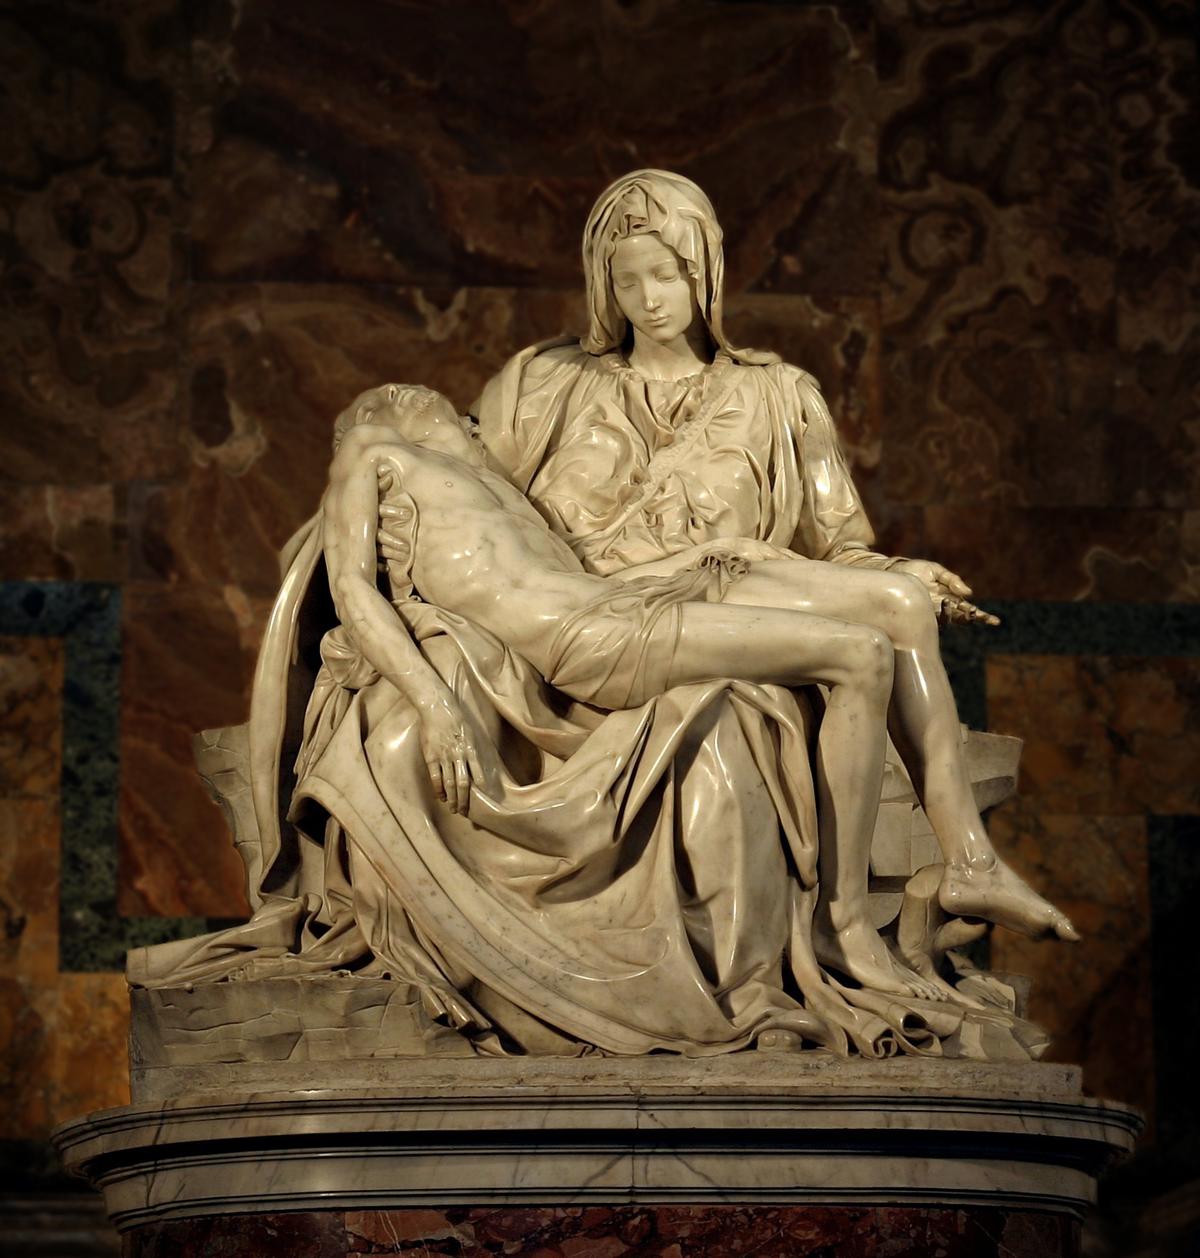 In 1497, Michelangelo made his first trip to the Carrara marble quarries in the mountains of Tuscany, Italy, and he carefully selected the block of marble that would become the Pietà: one of his most admired statues. "Pietà," 1497, by Michelangelo. Carrara Marble. Saint Peters Basilica, Rome. (Public Domain)